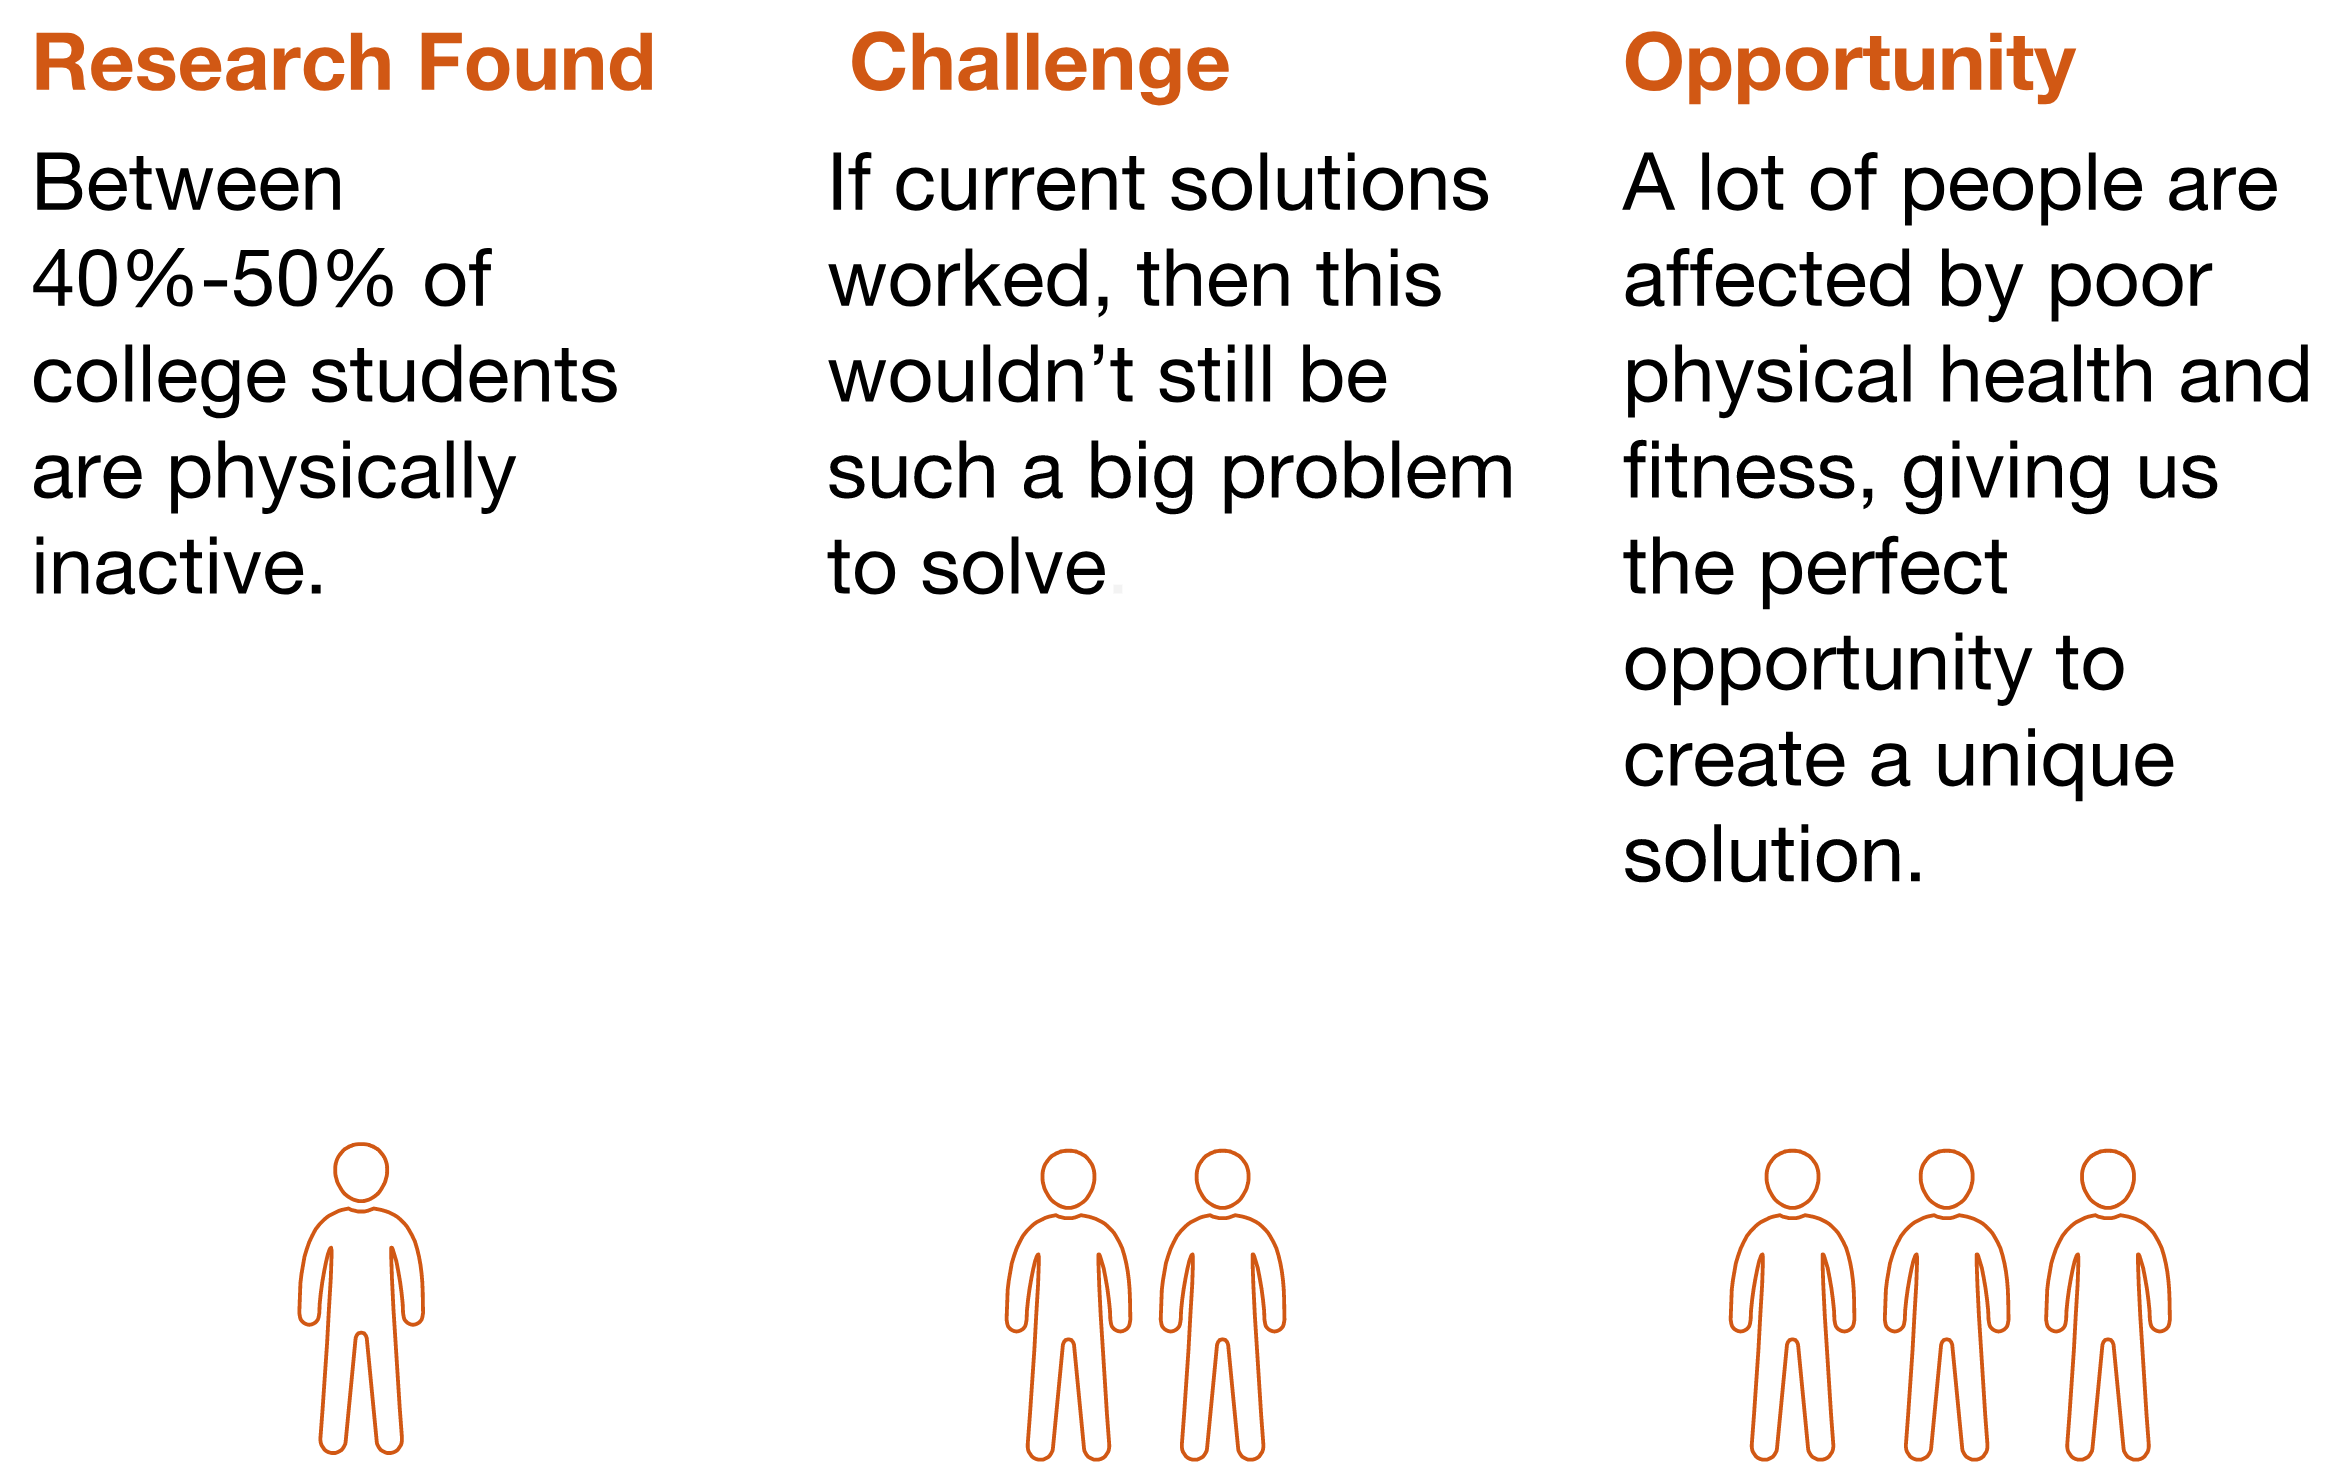 An image of our project's 3 motivations, Research Found, Challenge, and Opportunity